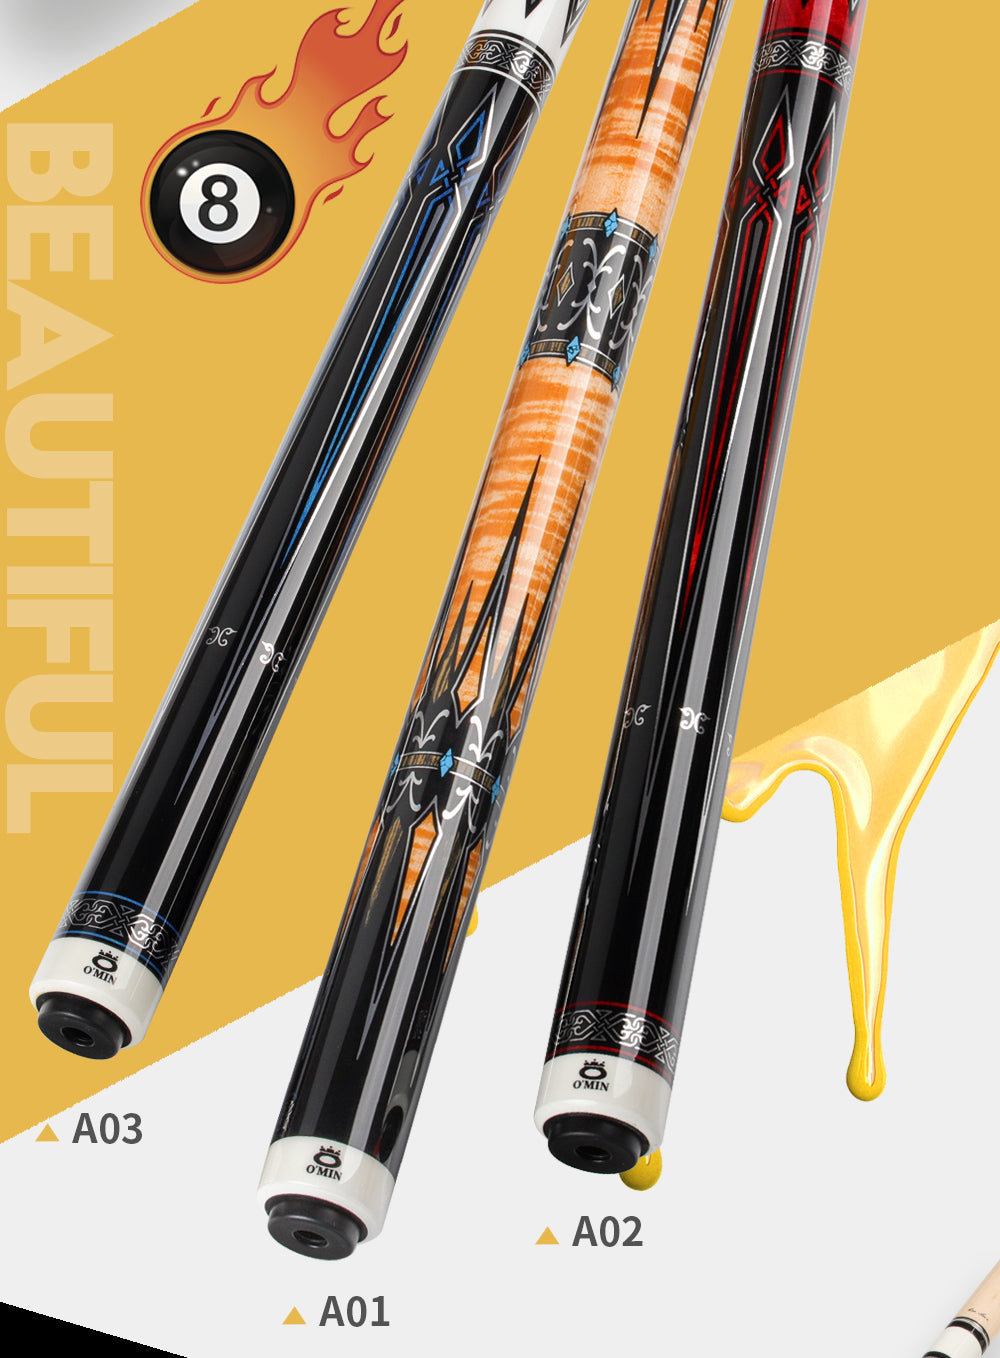 OMIN XF-A1-3 Pool Cue Billiard Stick Kit with Extension Shaft with Carbon Tube 55cm 12.8mm Tip Maple Adjustable Weigh Bolt